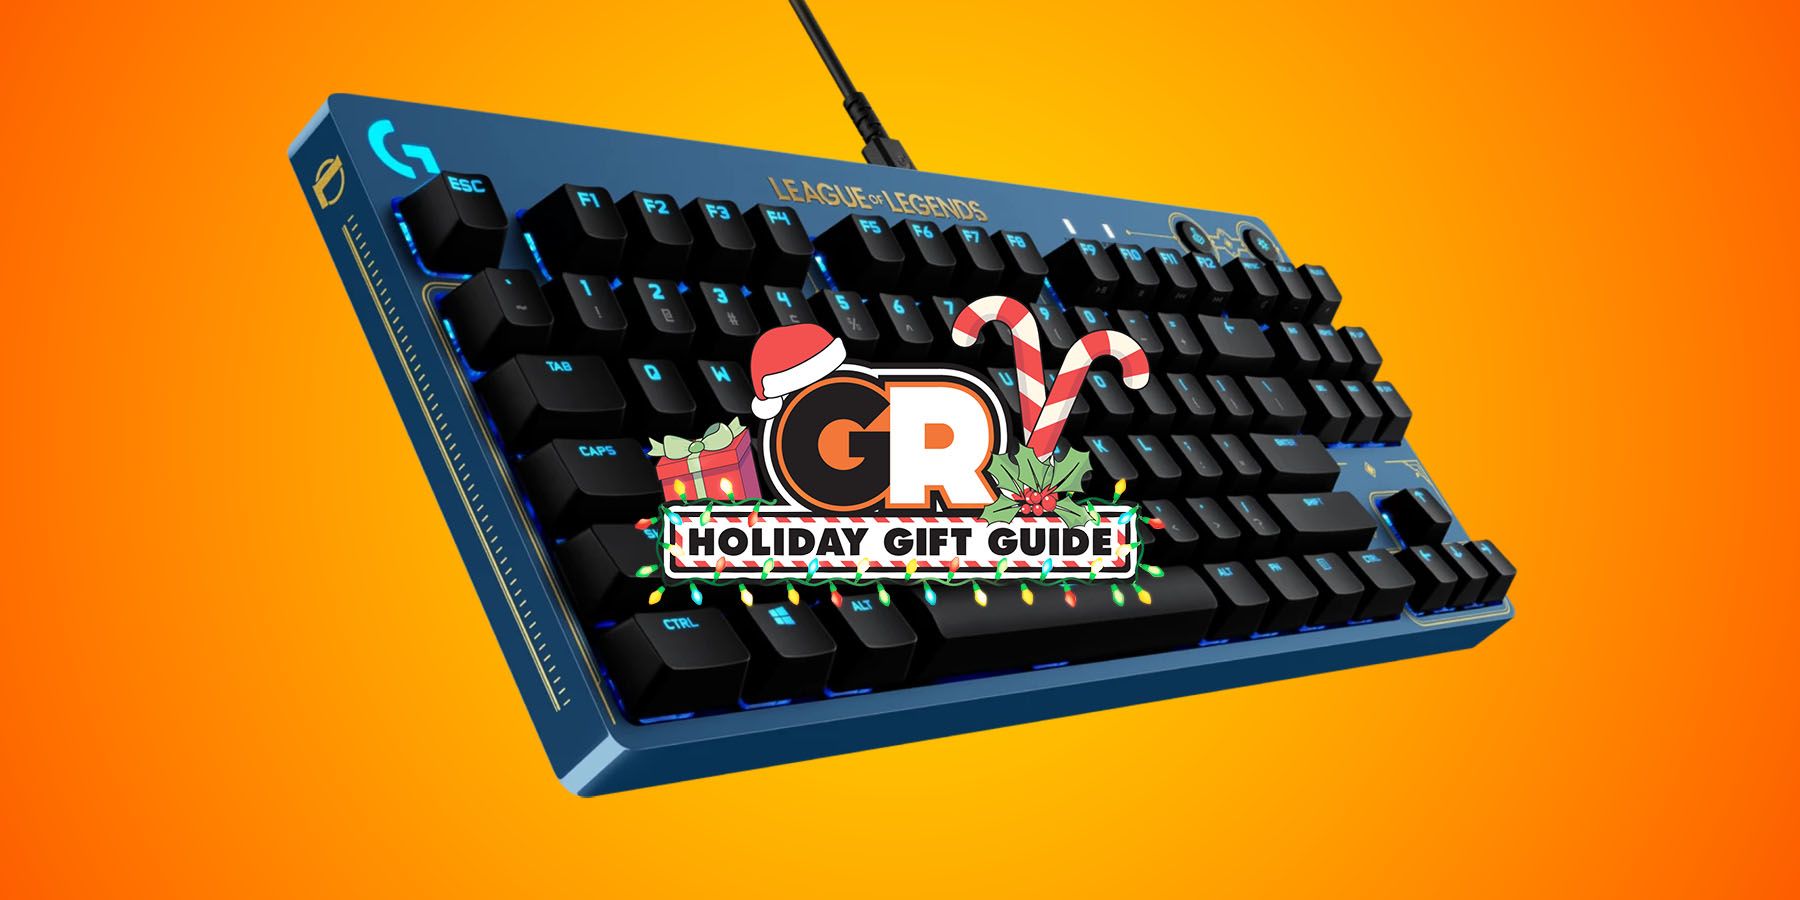 Logitech G $59.99 a LoL Gaming For Time Pro Keyboard Edition Limited